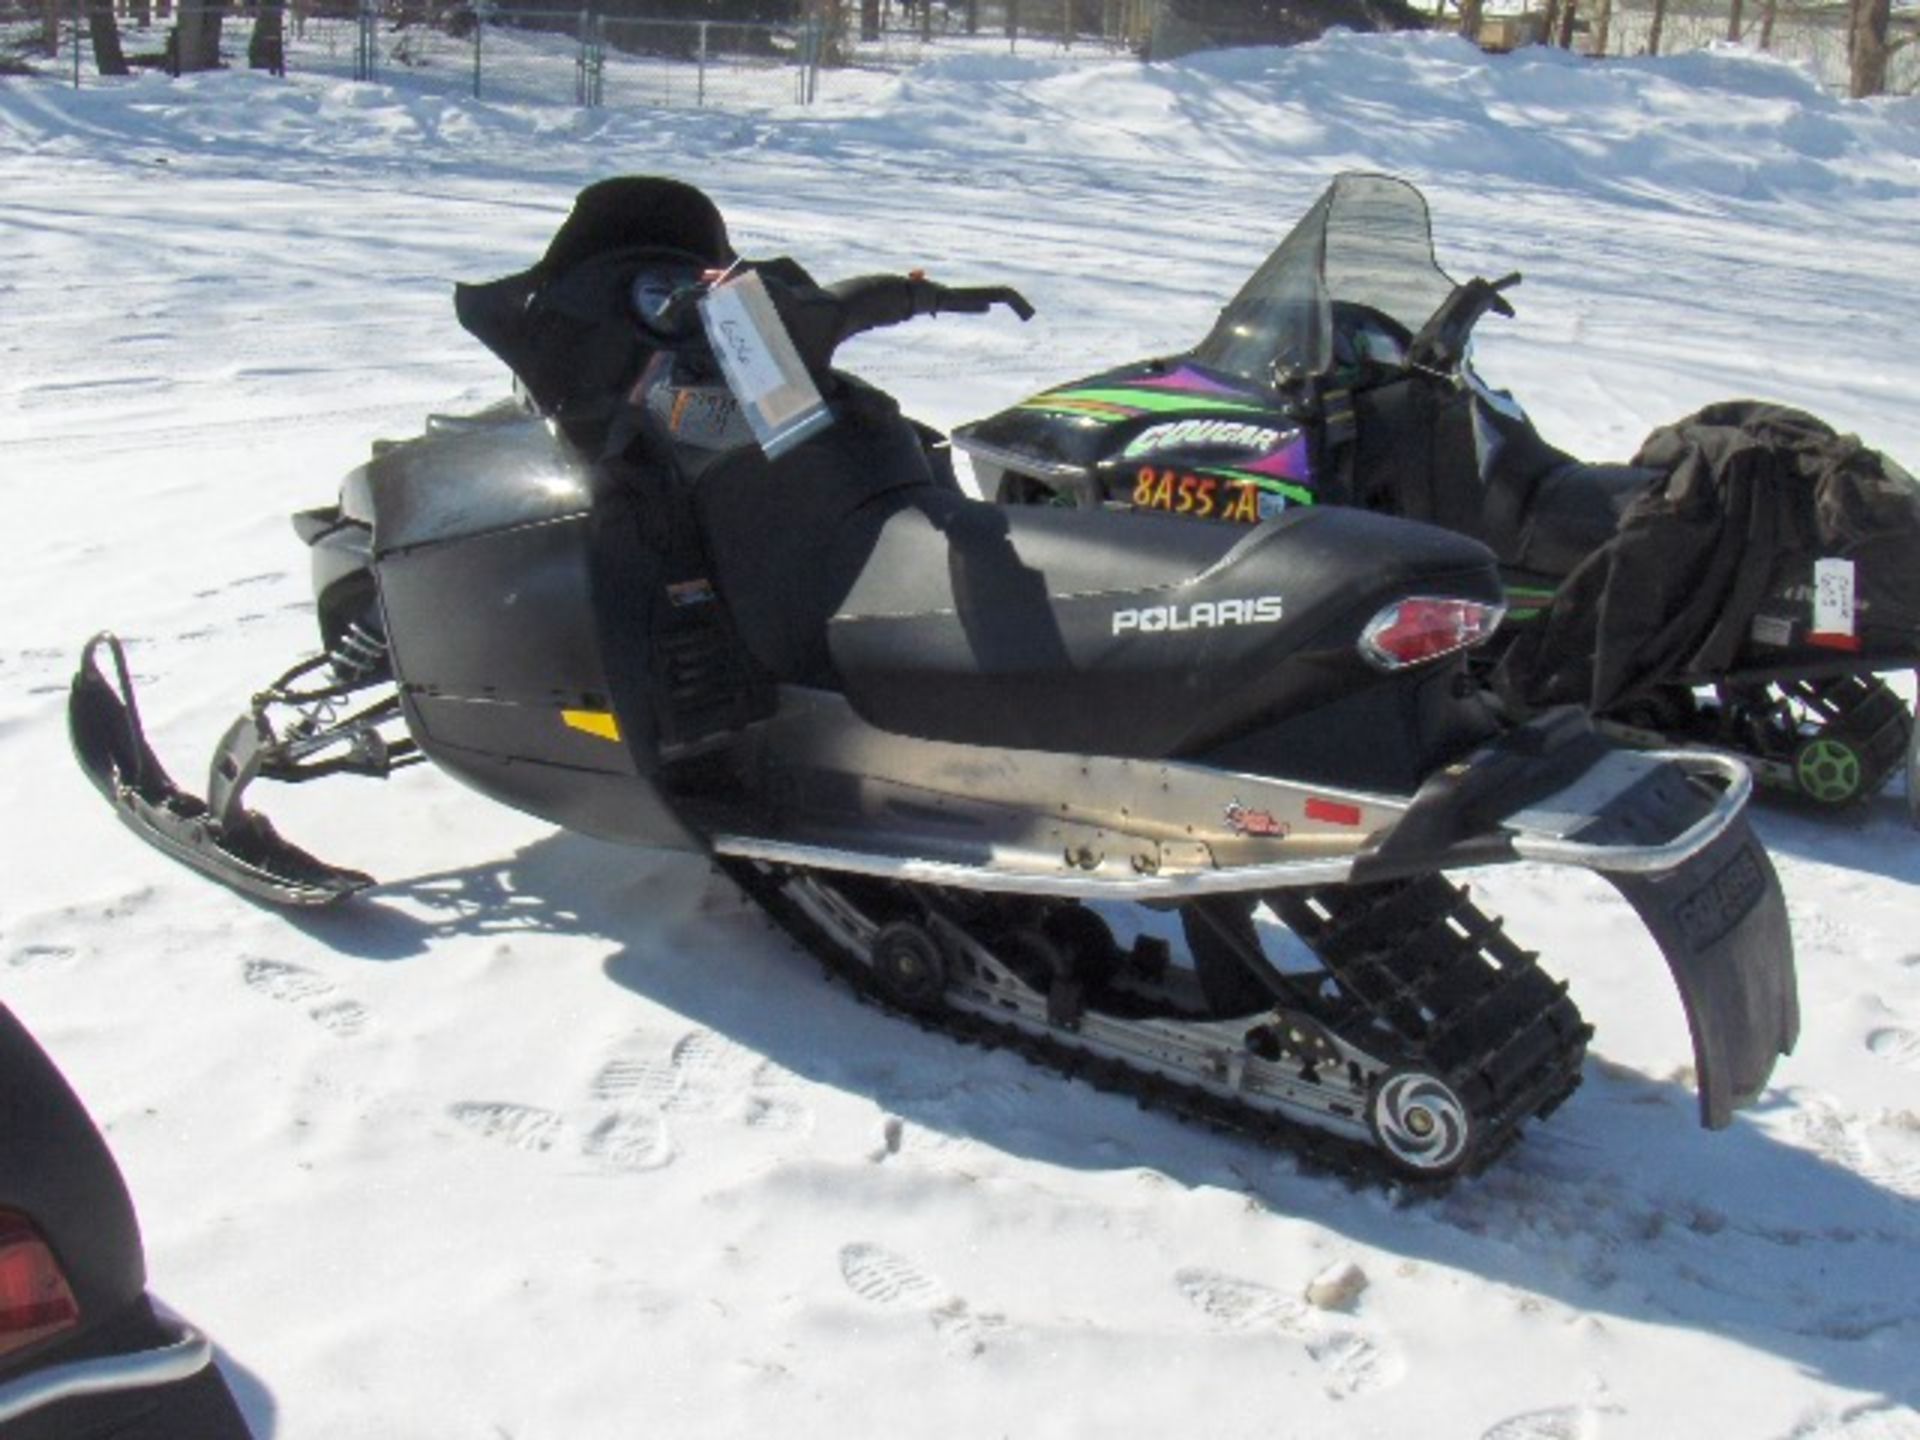 2008 POLARIS 750 SWITCHBACK 4XAMN50A98B299780 snowmobile, owner started at time of check-in, - Image 4 of 4